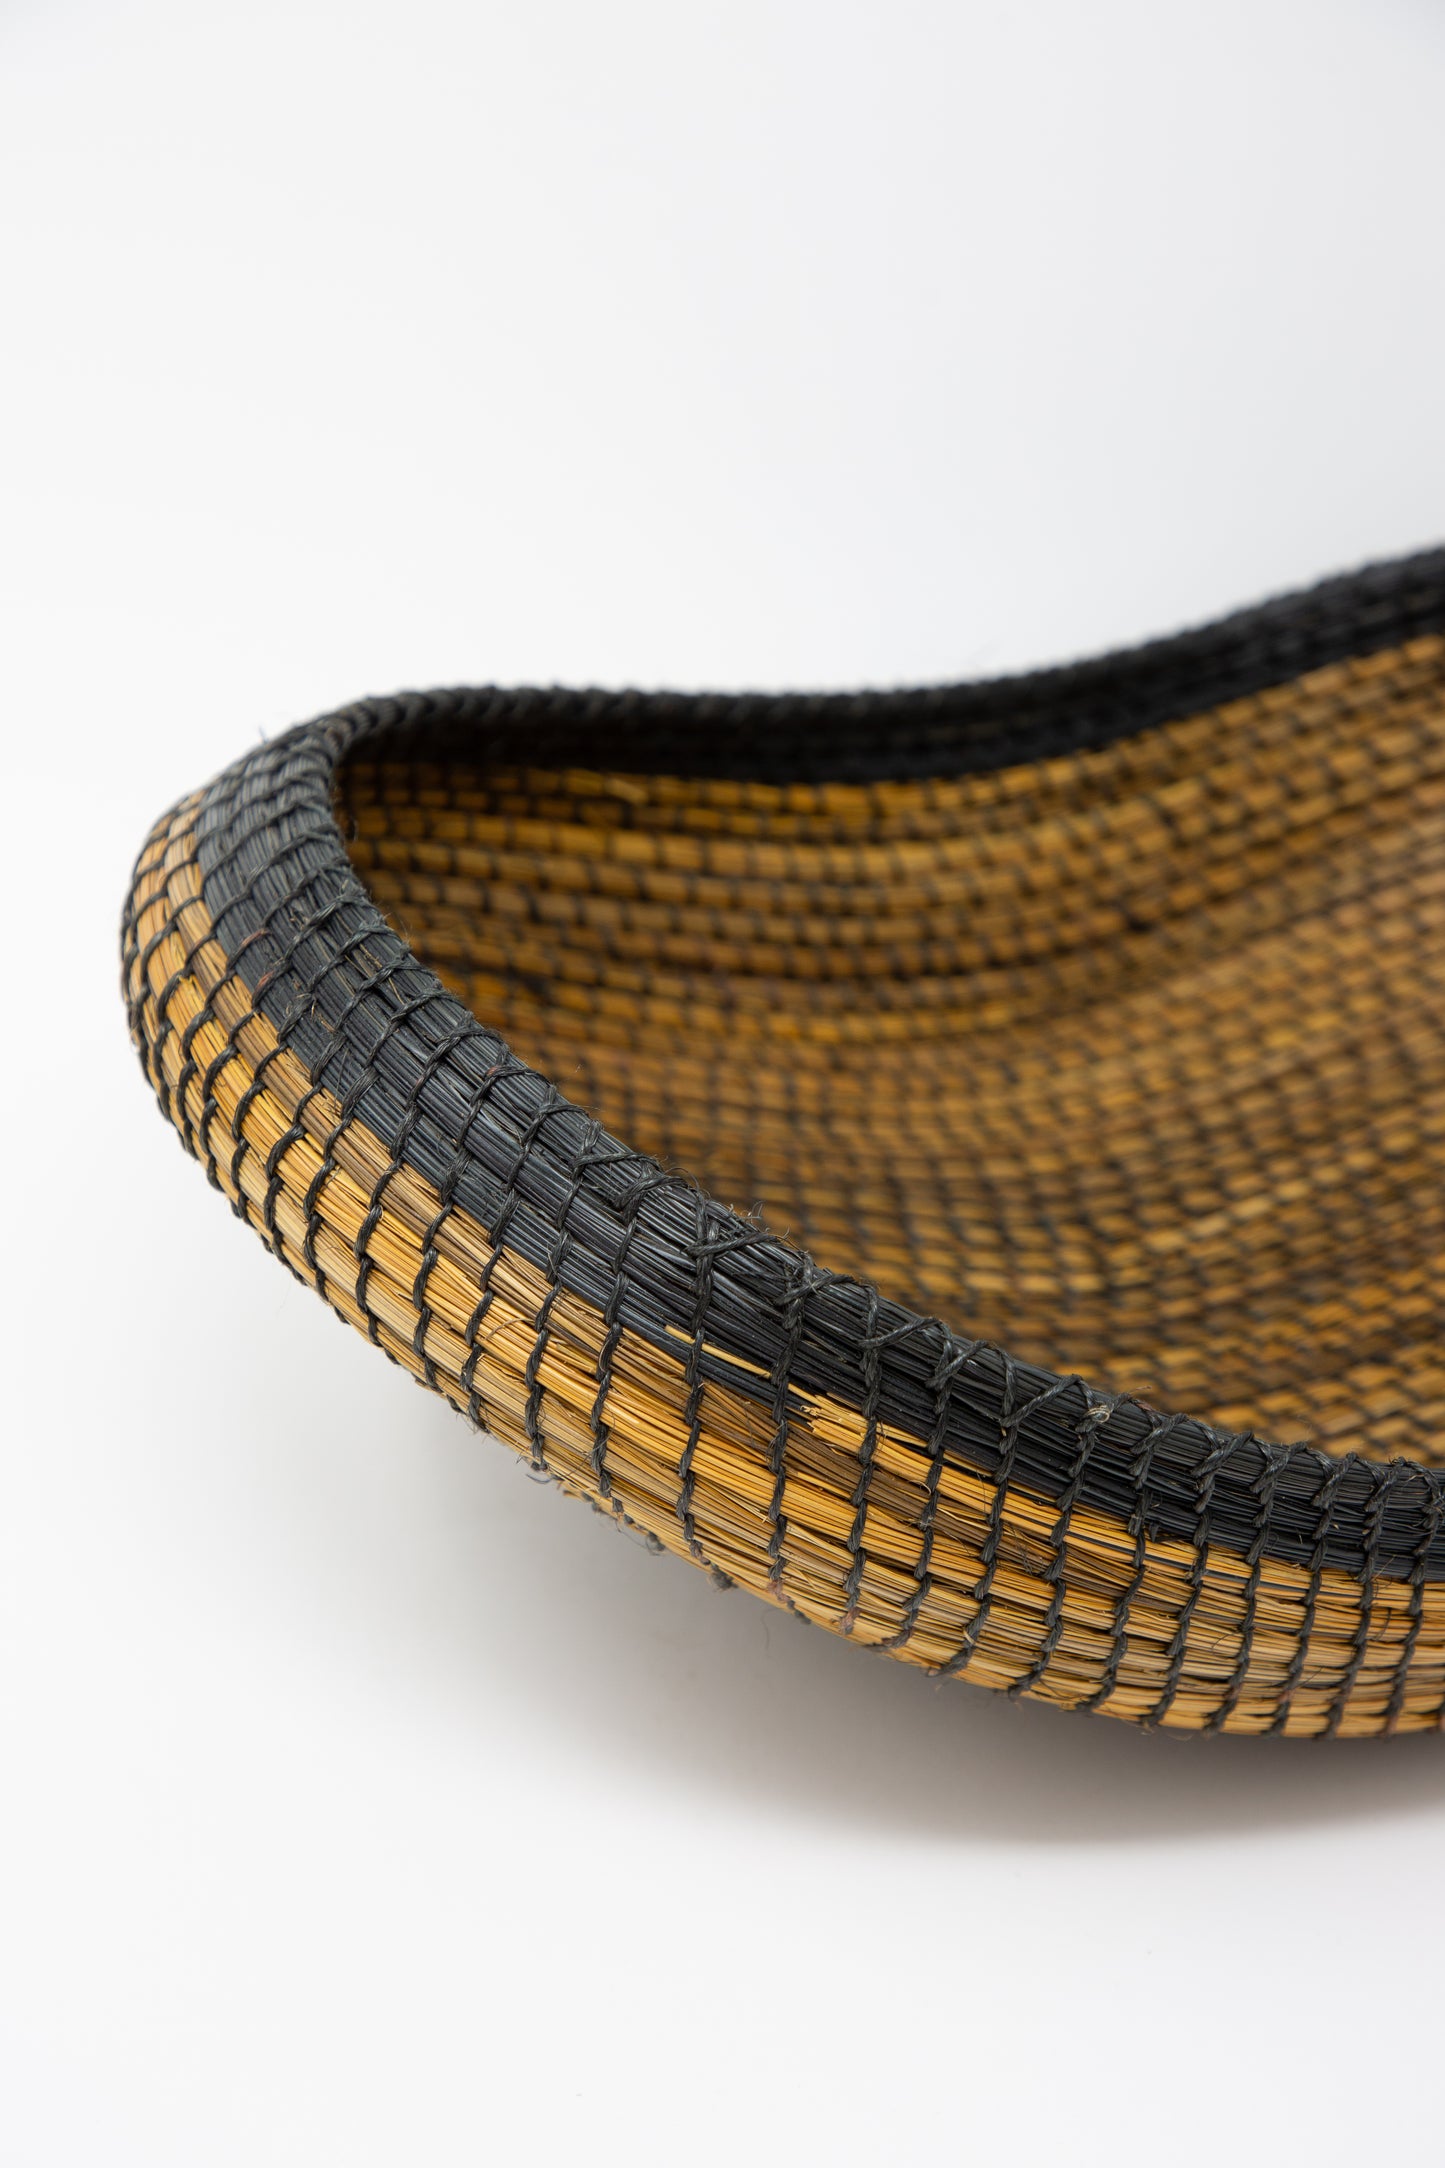 A traditional Plaza Bolivar Asopafit Canoe Basket, woven in black and brown, on a white surface. Up close view. 